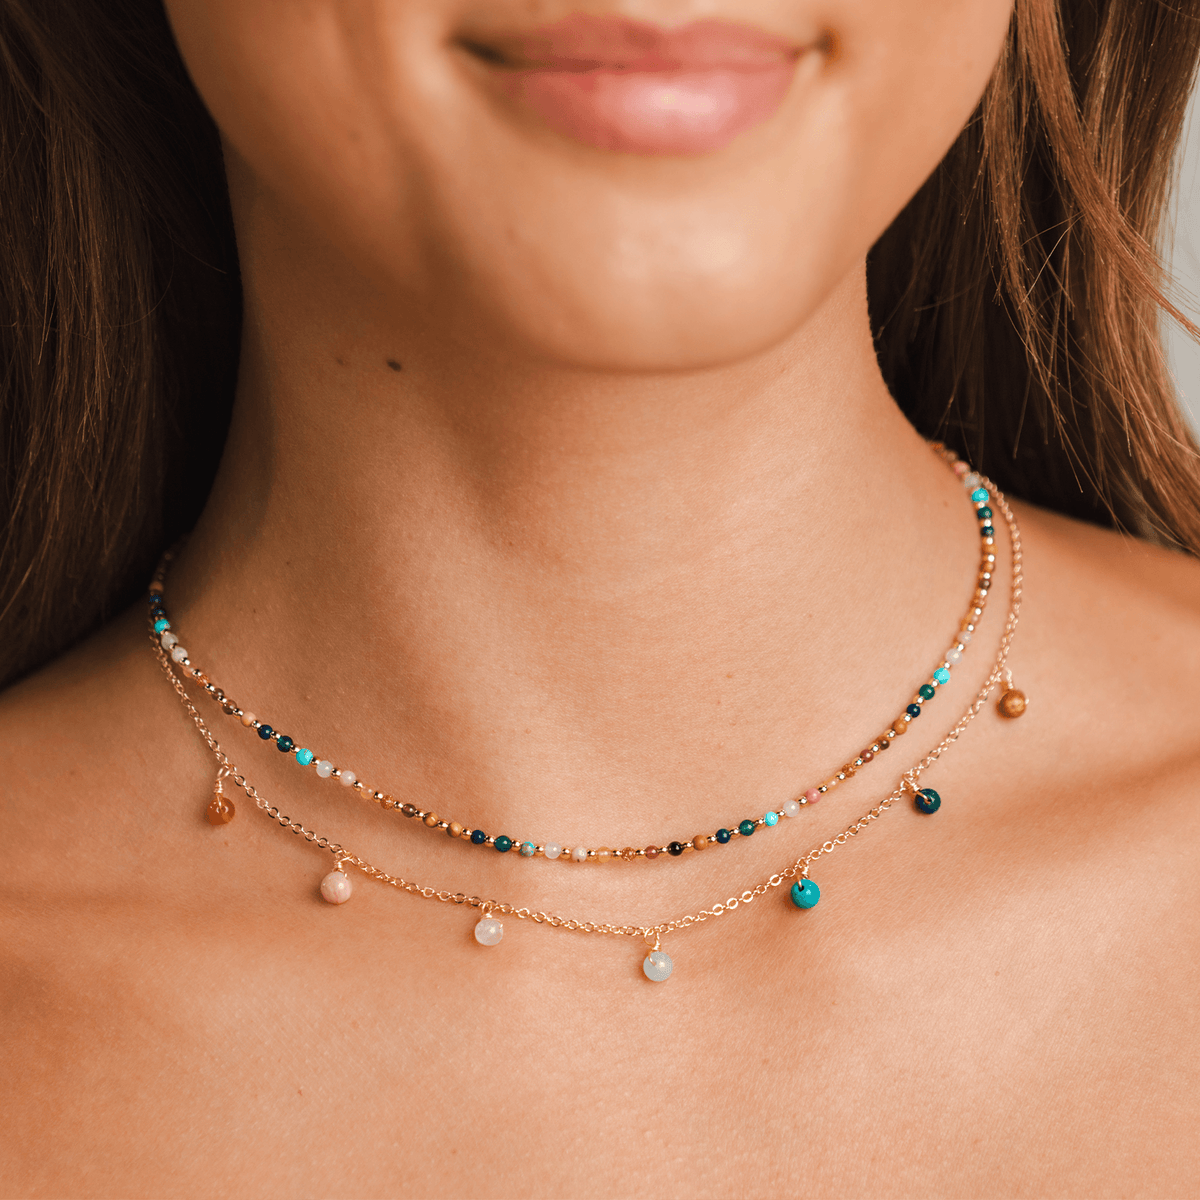 Dainty necklace with assorted multi-color stones and gold beads